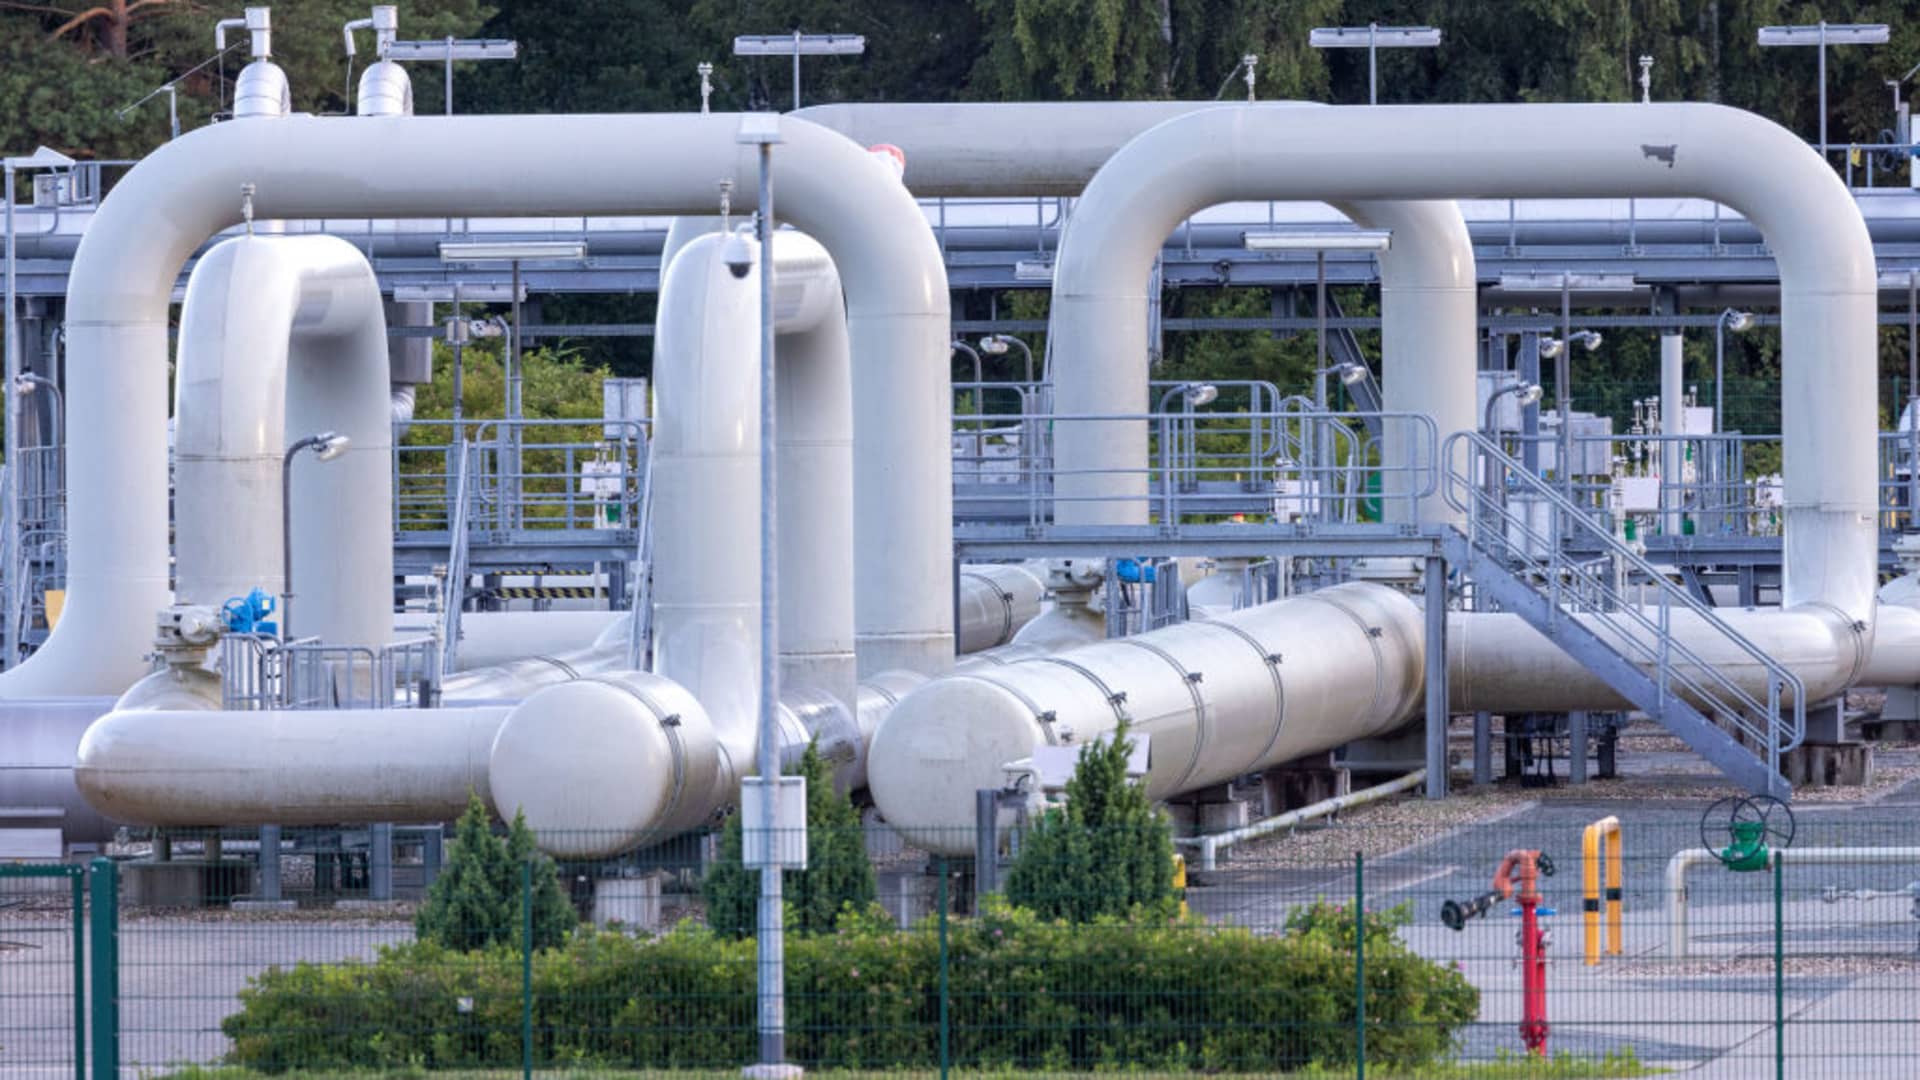 The Nord Stream 1 pipeline, through which Russian natural gas has been flowing to Germany since 2011, will be shut down for around 10 days for scheduled maintenance work.